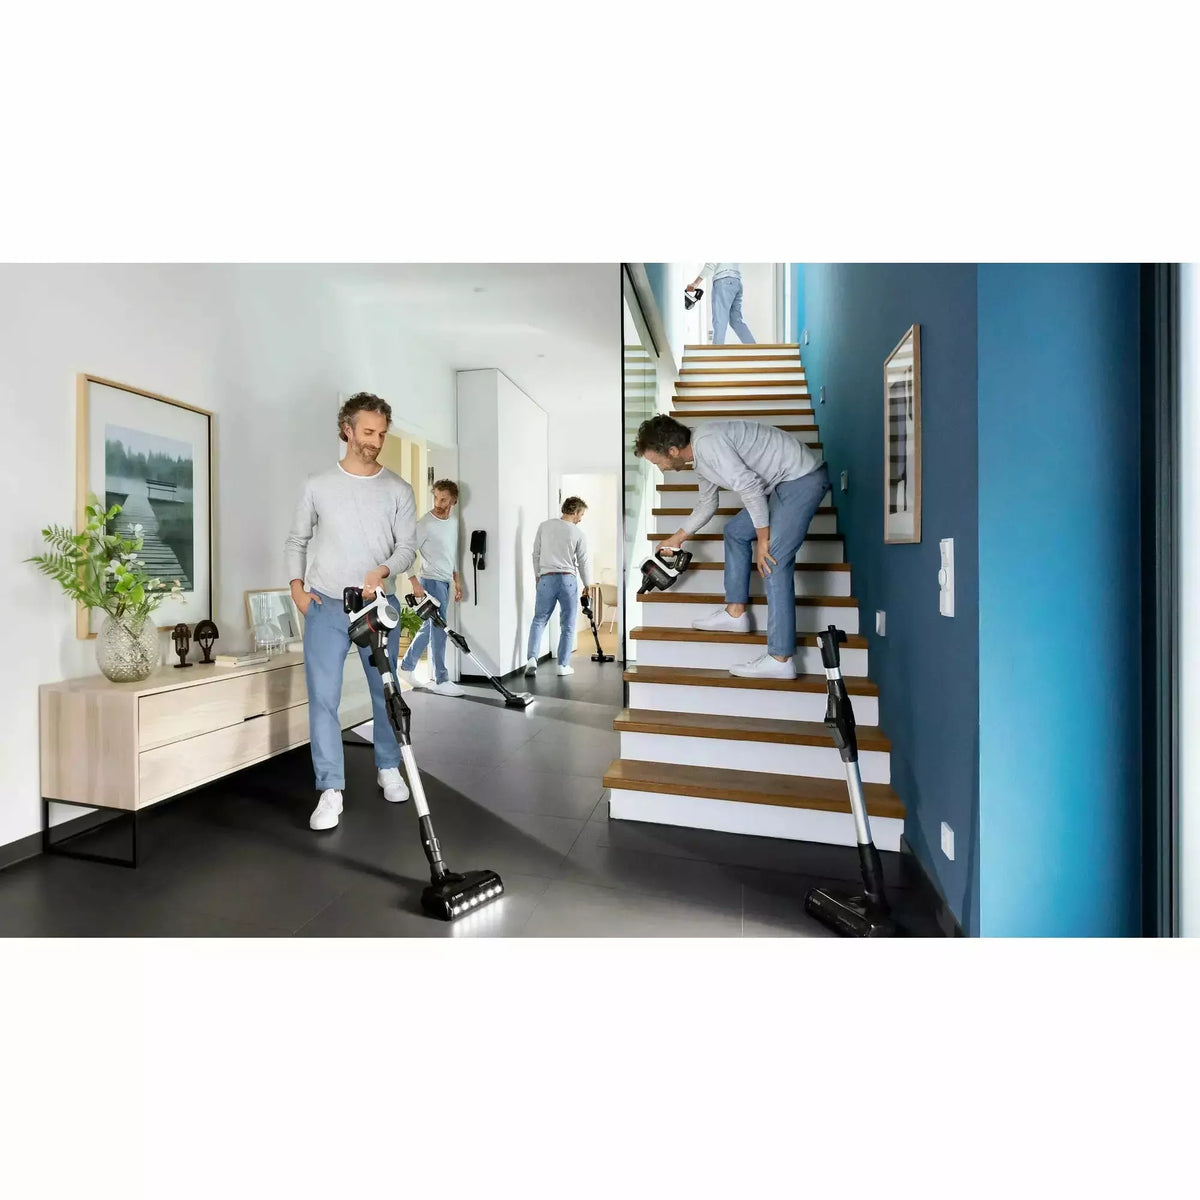 Bosch 0.9L Unlimited 7 Rechargeable Vacuum Cleaner - White | BCS712GB (7549593223356)